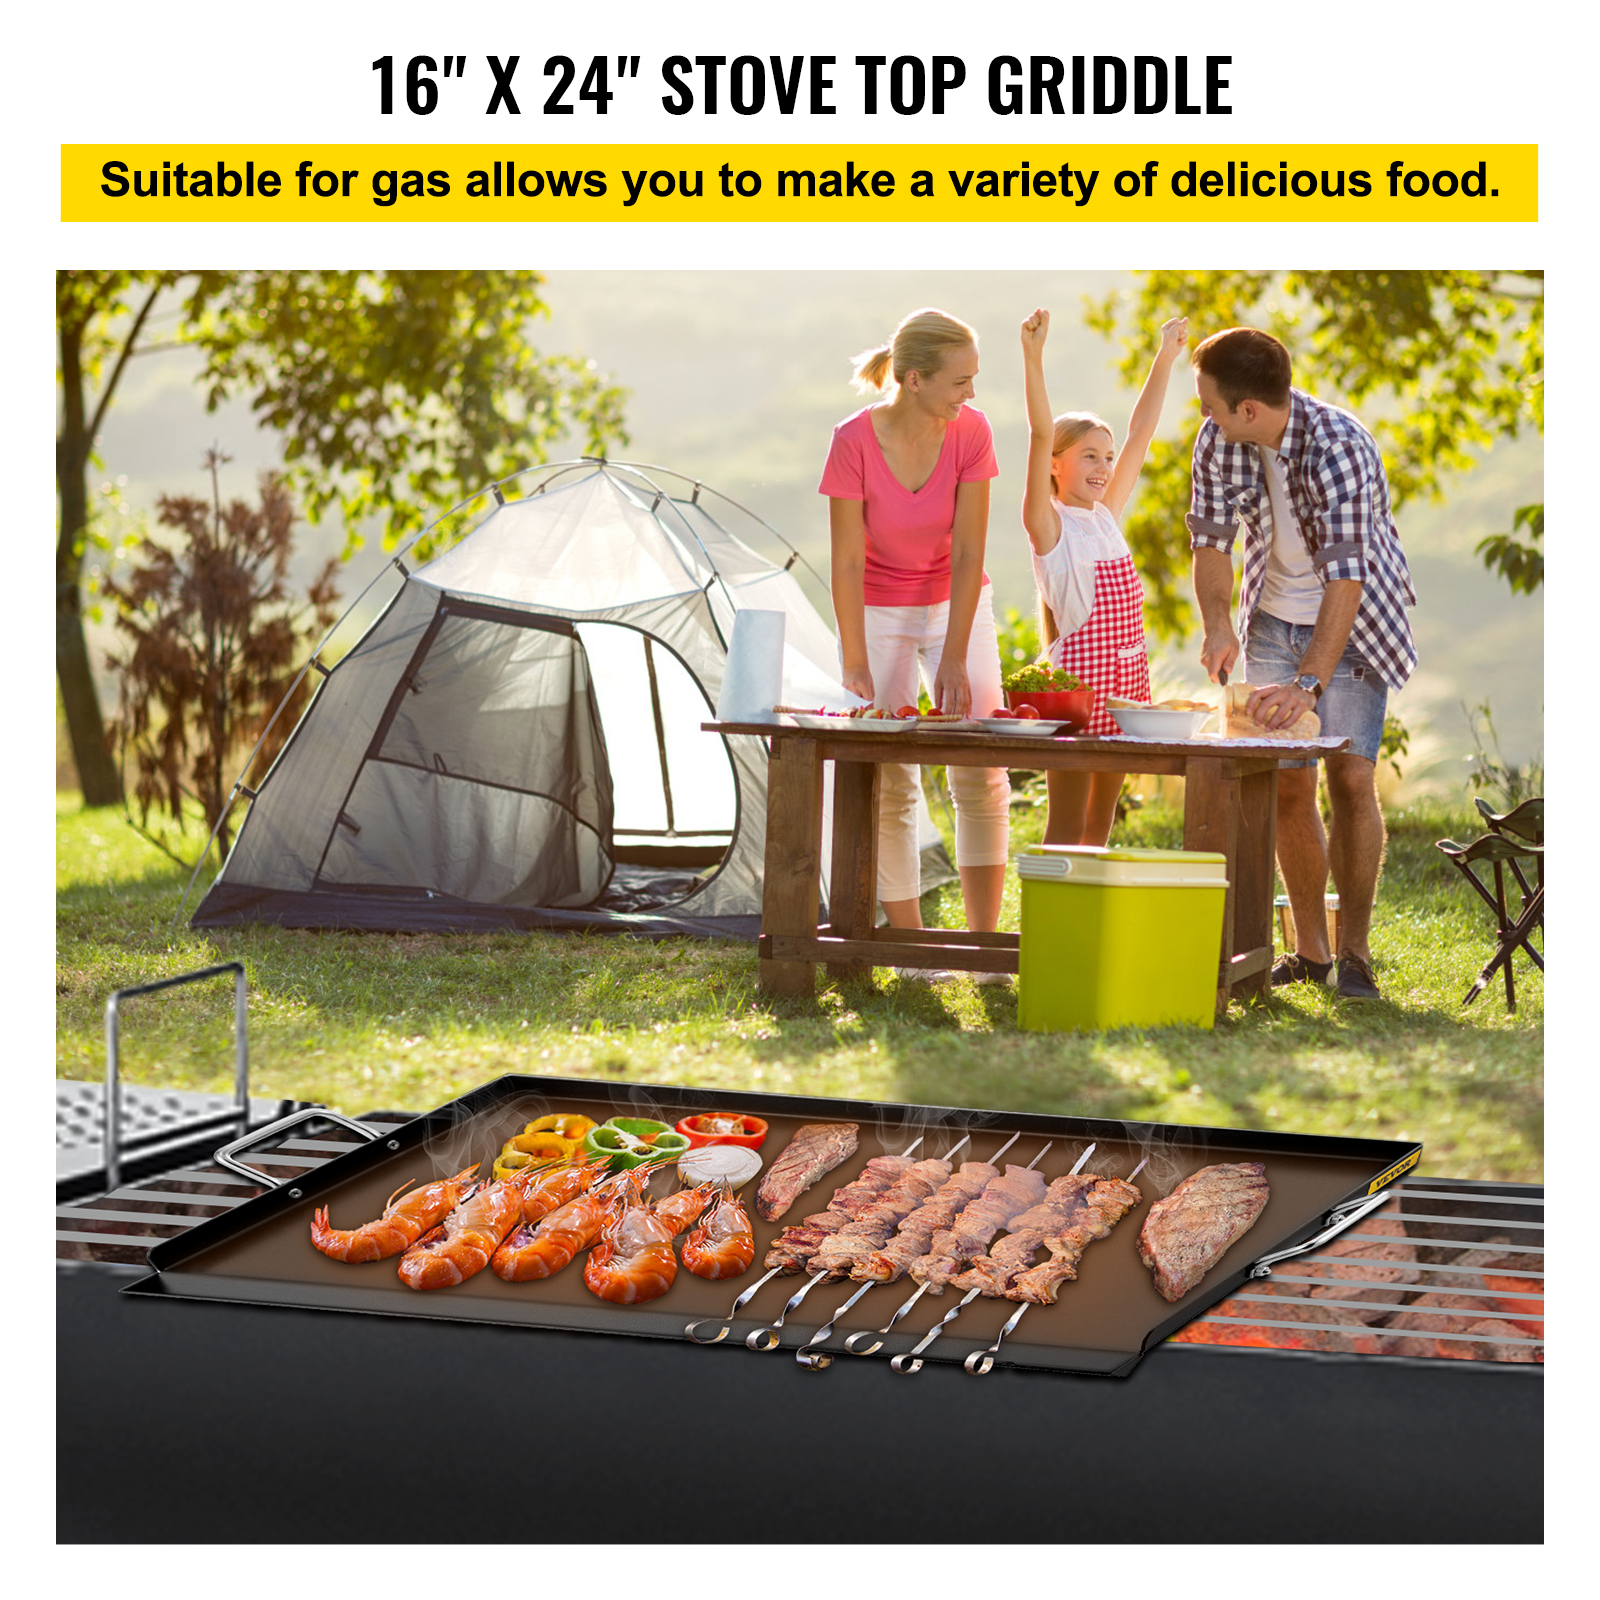 https://d2qc09rl1gfuof.cloudfront.net/product/RQSKLYPD16X243YZ3/stove-top-griddle-f1.jpg